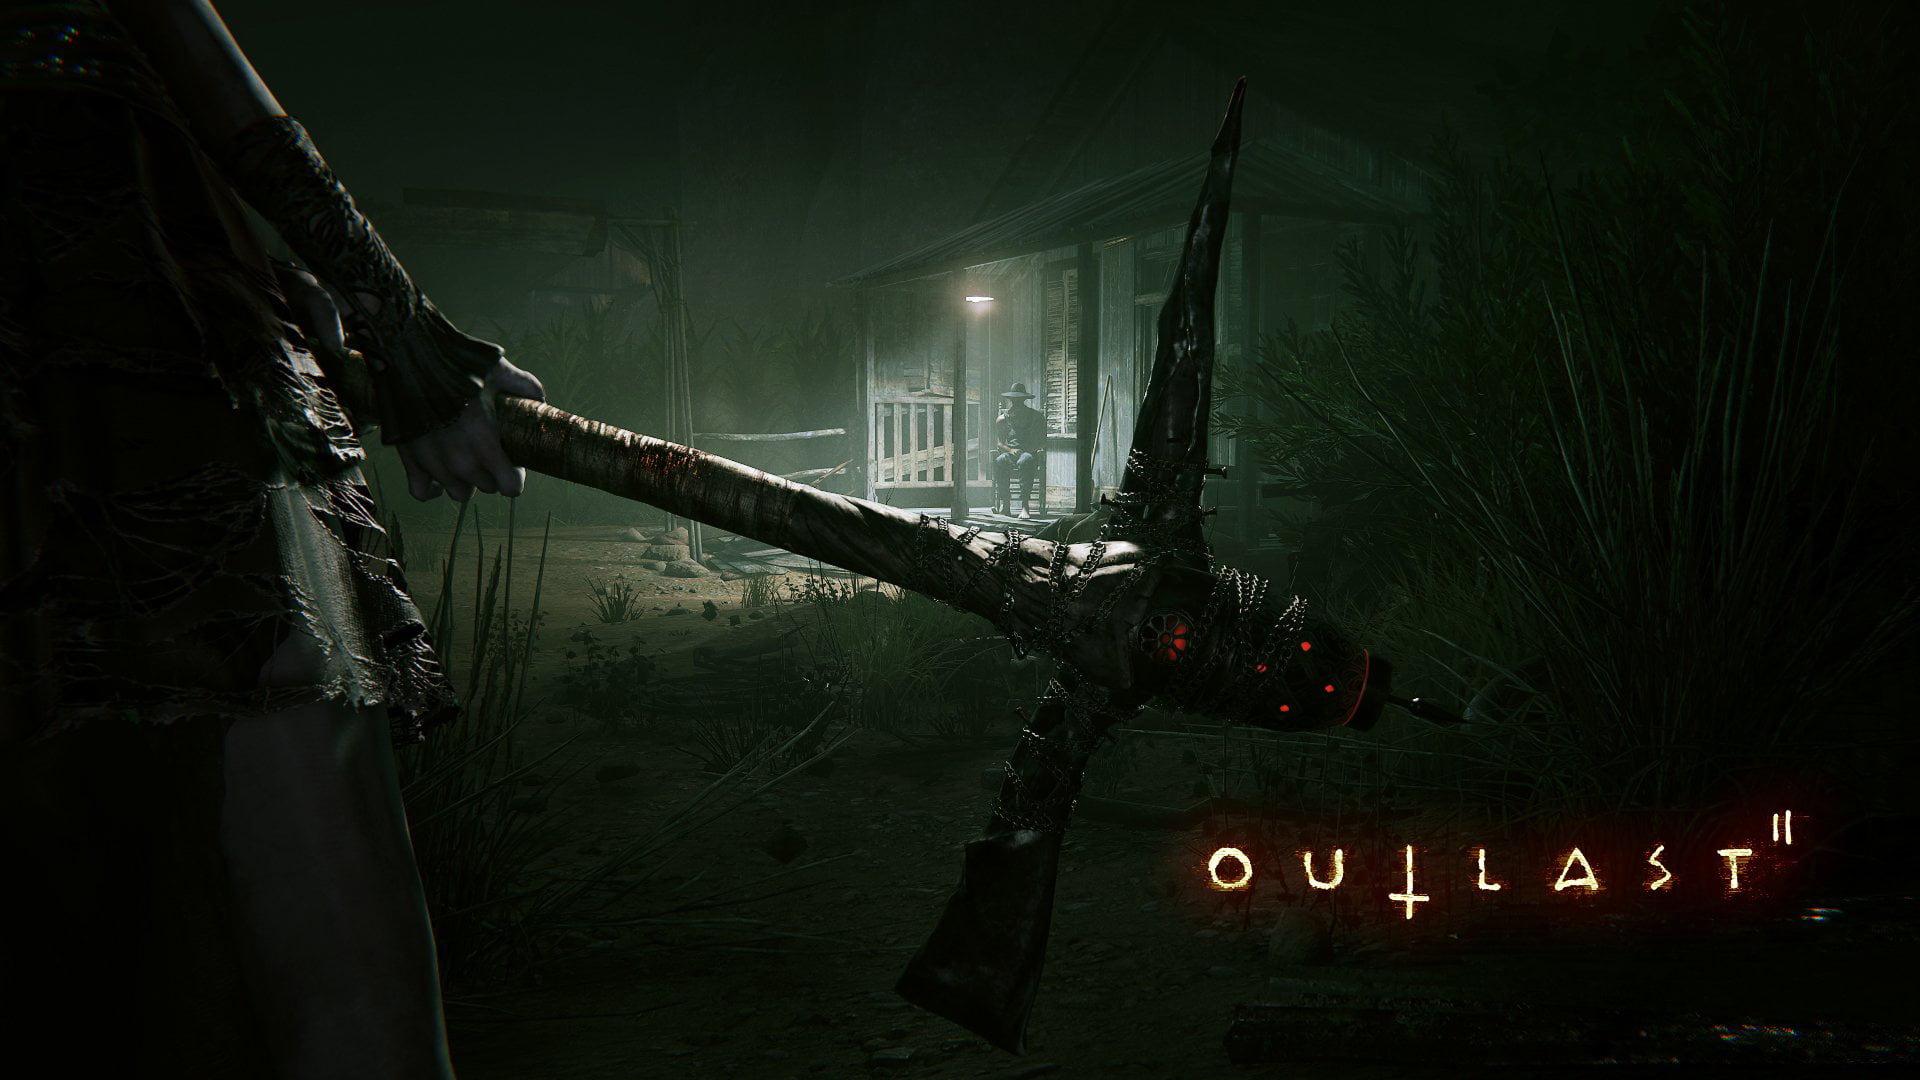 outlast 2, games, 2017 games, night, illuminated, architecture